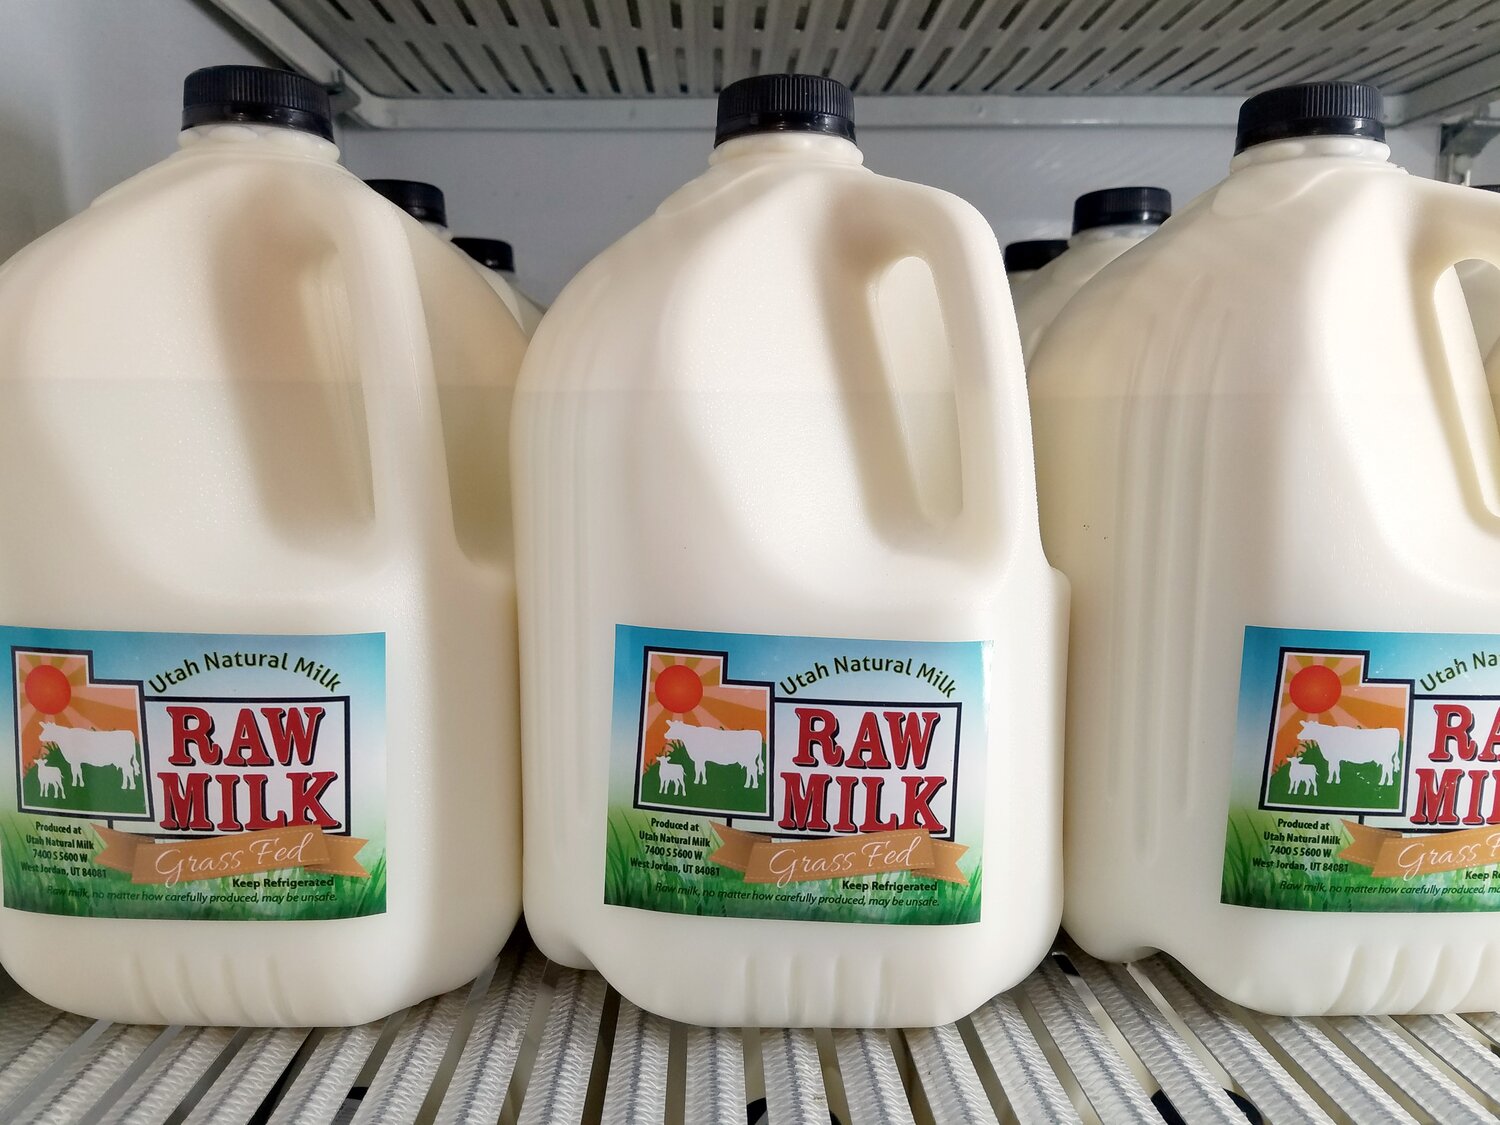 Food Freedom and the debate over raw milk in Colorado